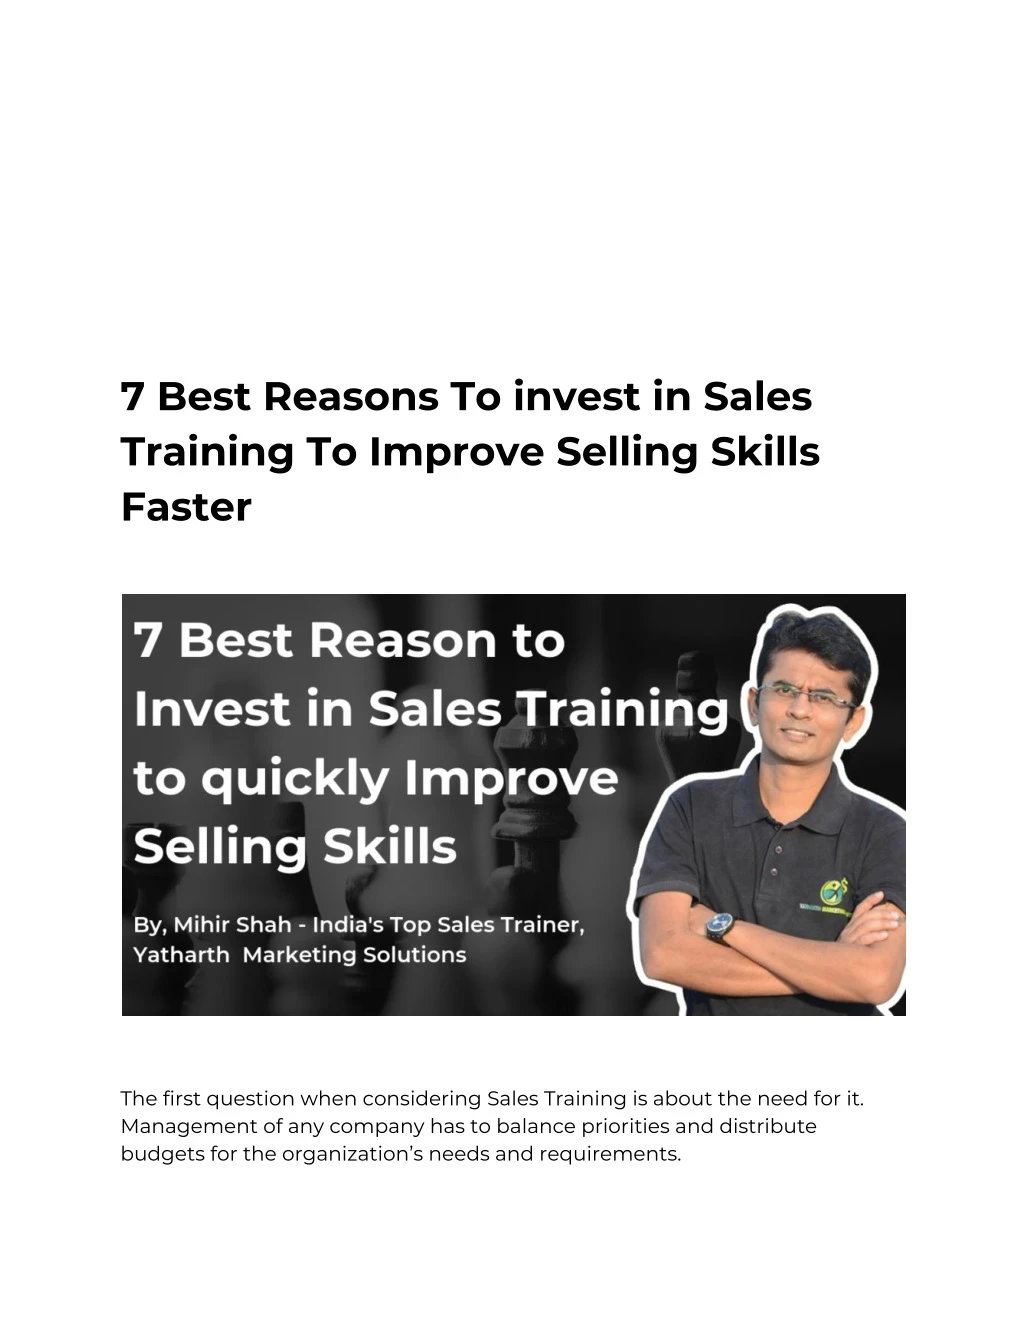 7 best reasons to invest in sales training